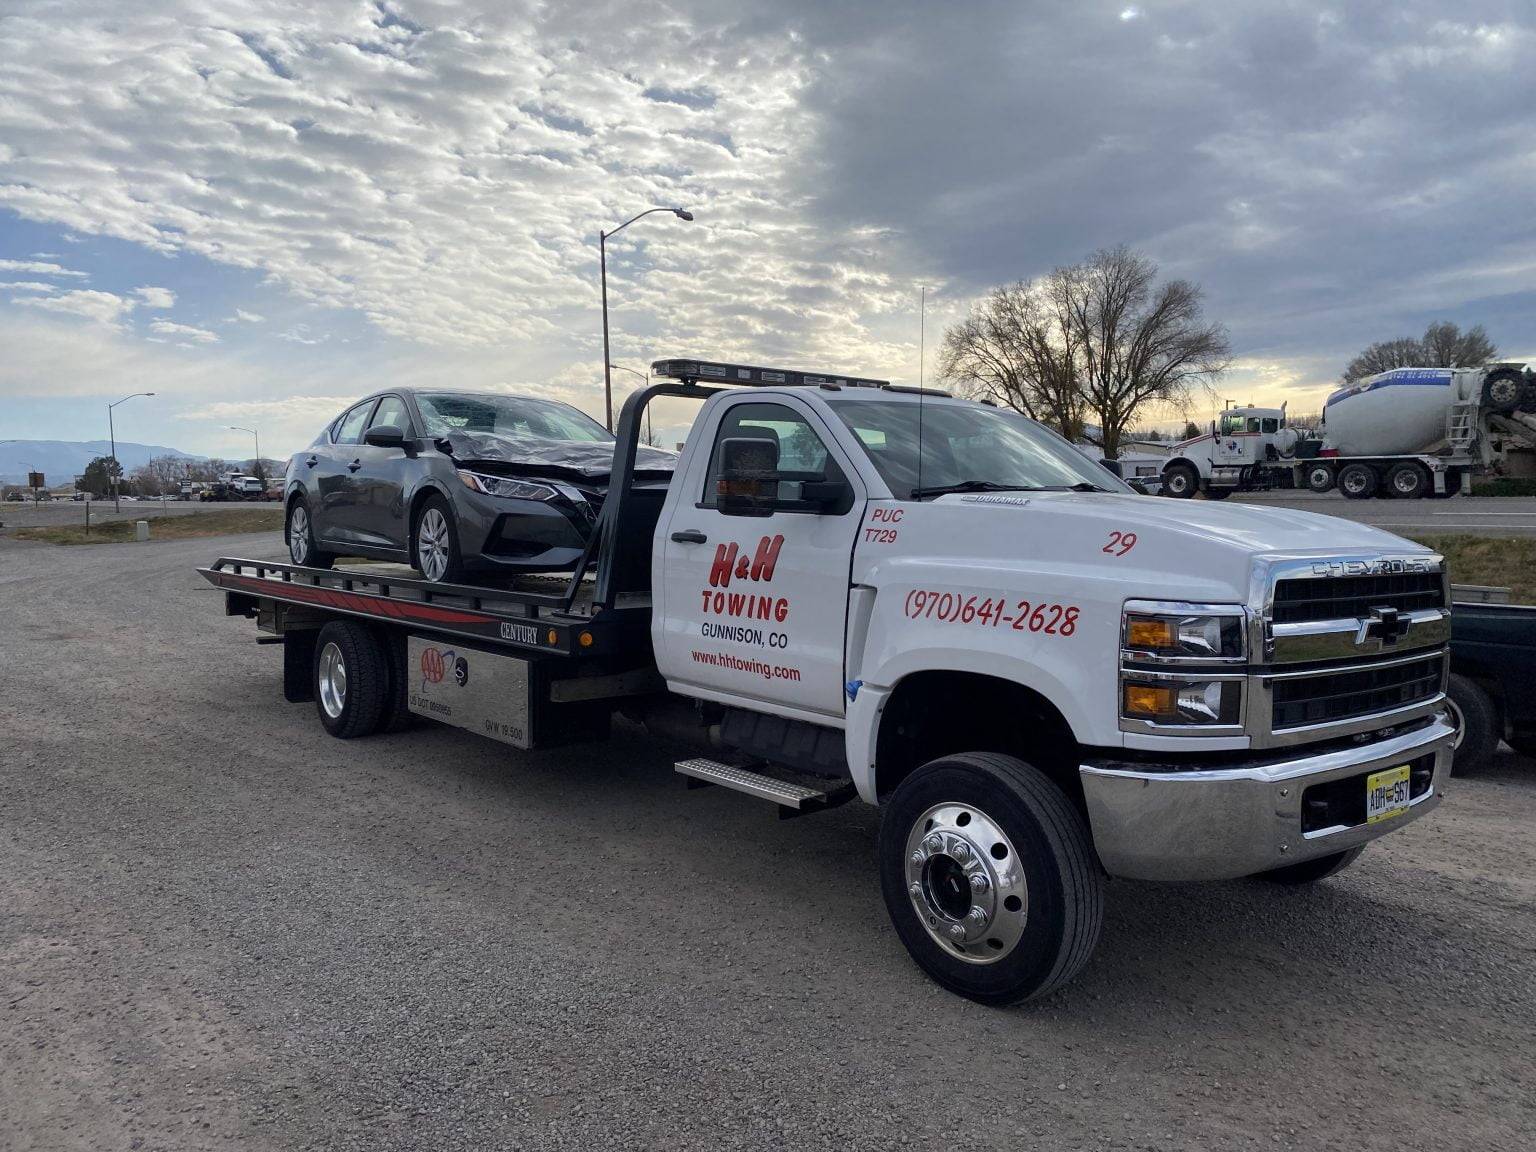 H & H Towing in Gunnison, CO